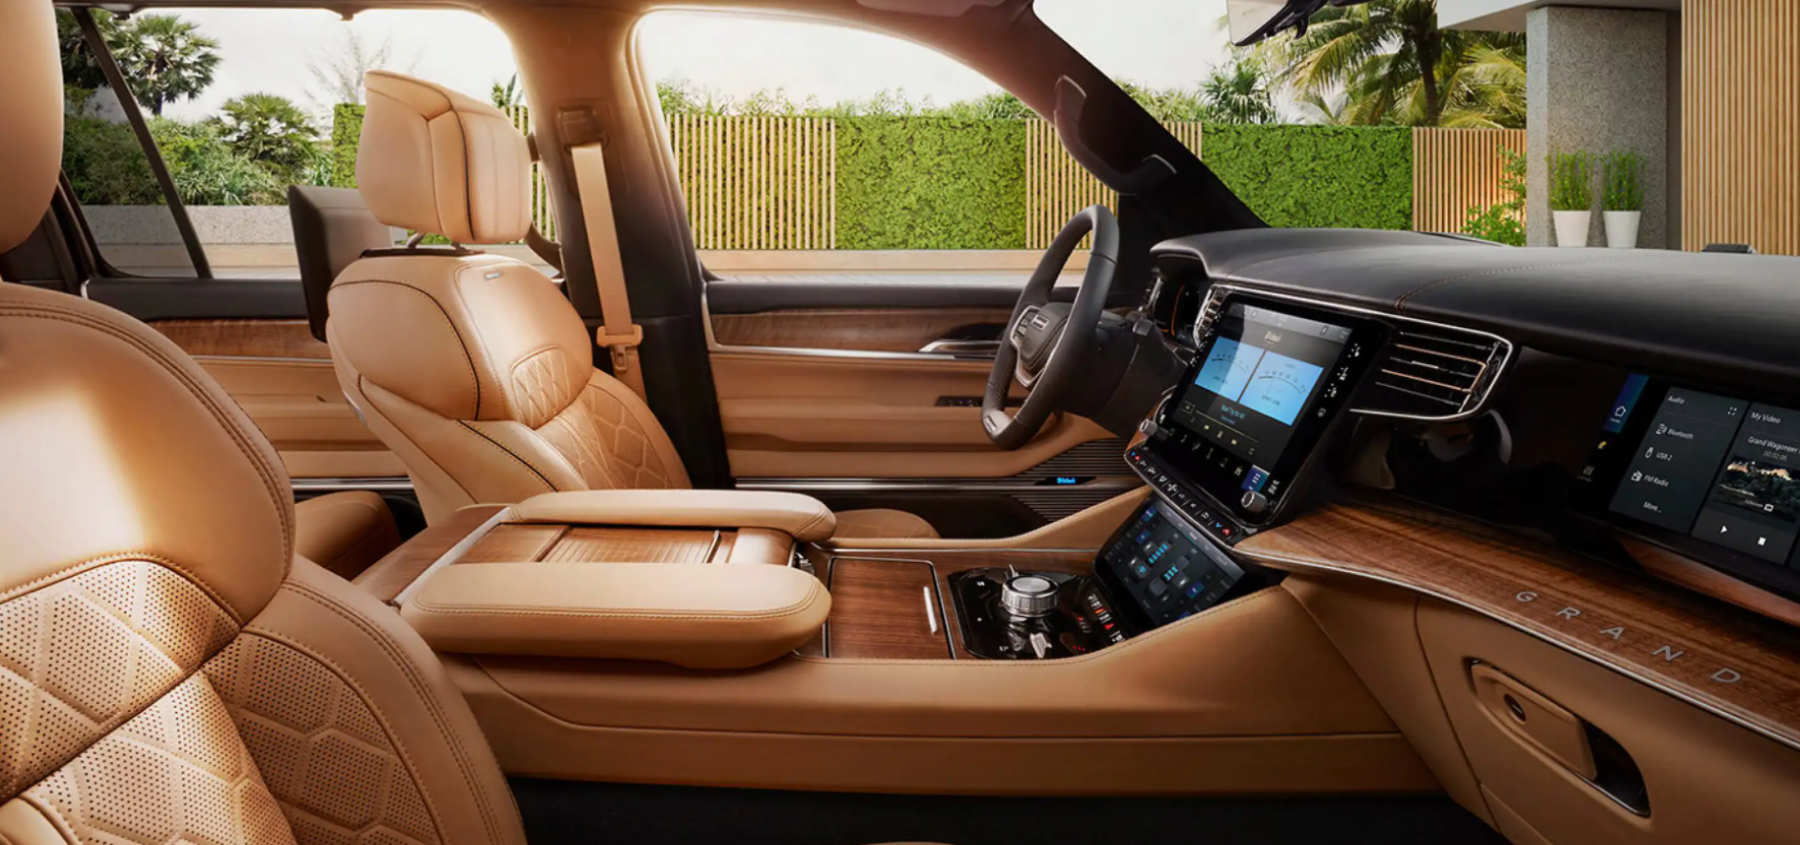 The interior front seat upholstery and dashboard technology layout of the 2022 Jeep Grand Wagoneer full-size luxury SUV